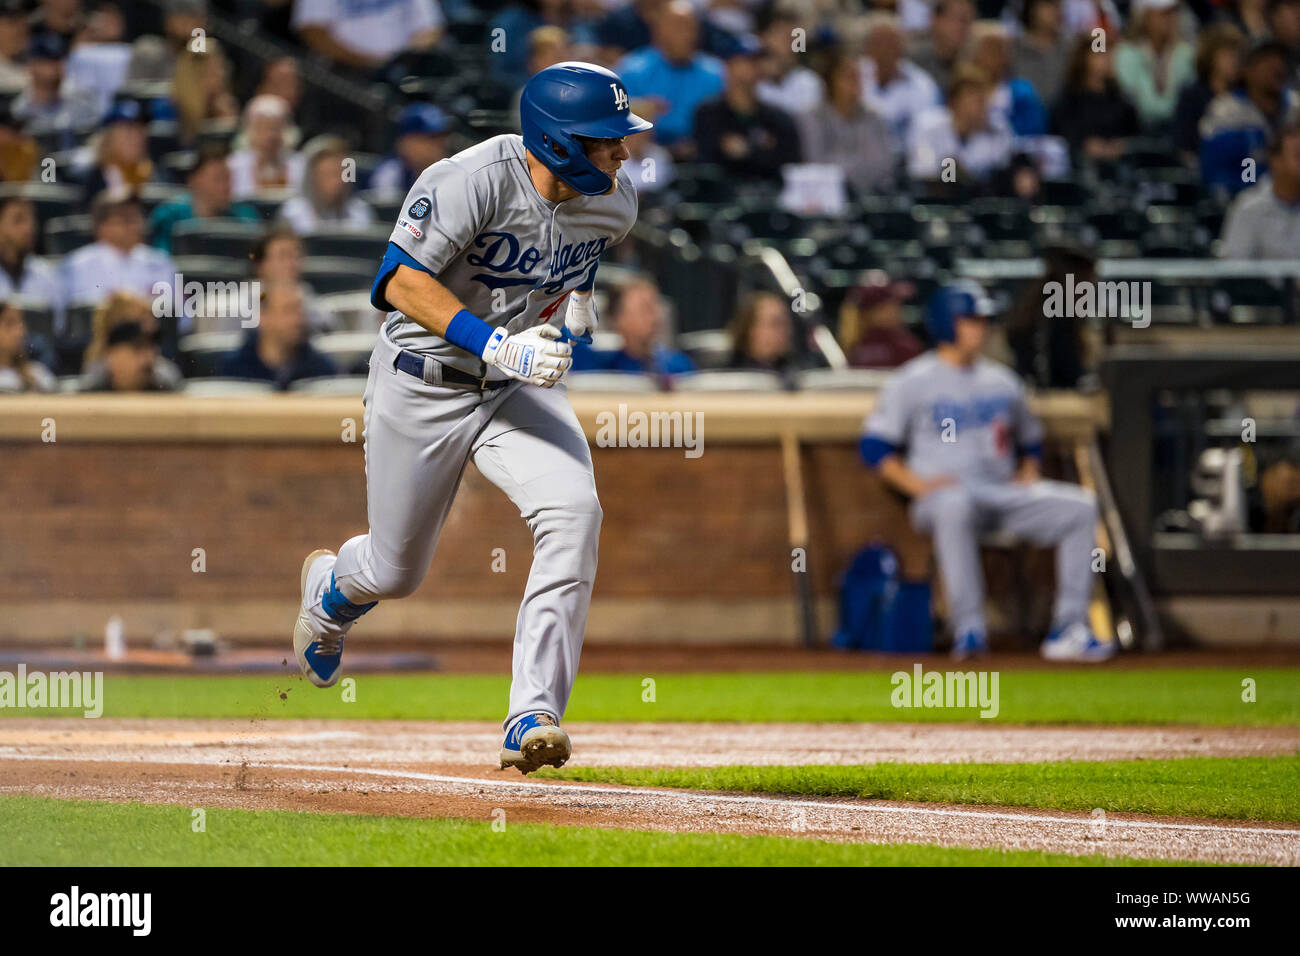 Queens, New York, USA. 13th Sep, 2019. Los Angeles Dodgers first baseman Matt Beaty (45) runs down the first baseline during the game between The New York Mets and The Los Angeles Dodgers at Citi Field in Queens, New York. Mandatory credit: Kostas Lymperopoulos/CSM/Alamy Live News Stock Photo